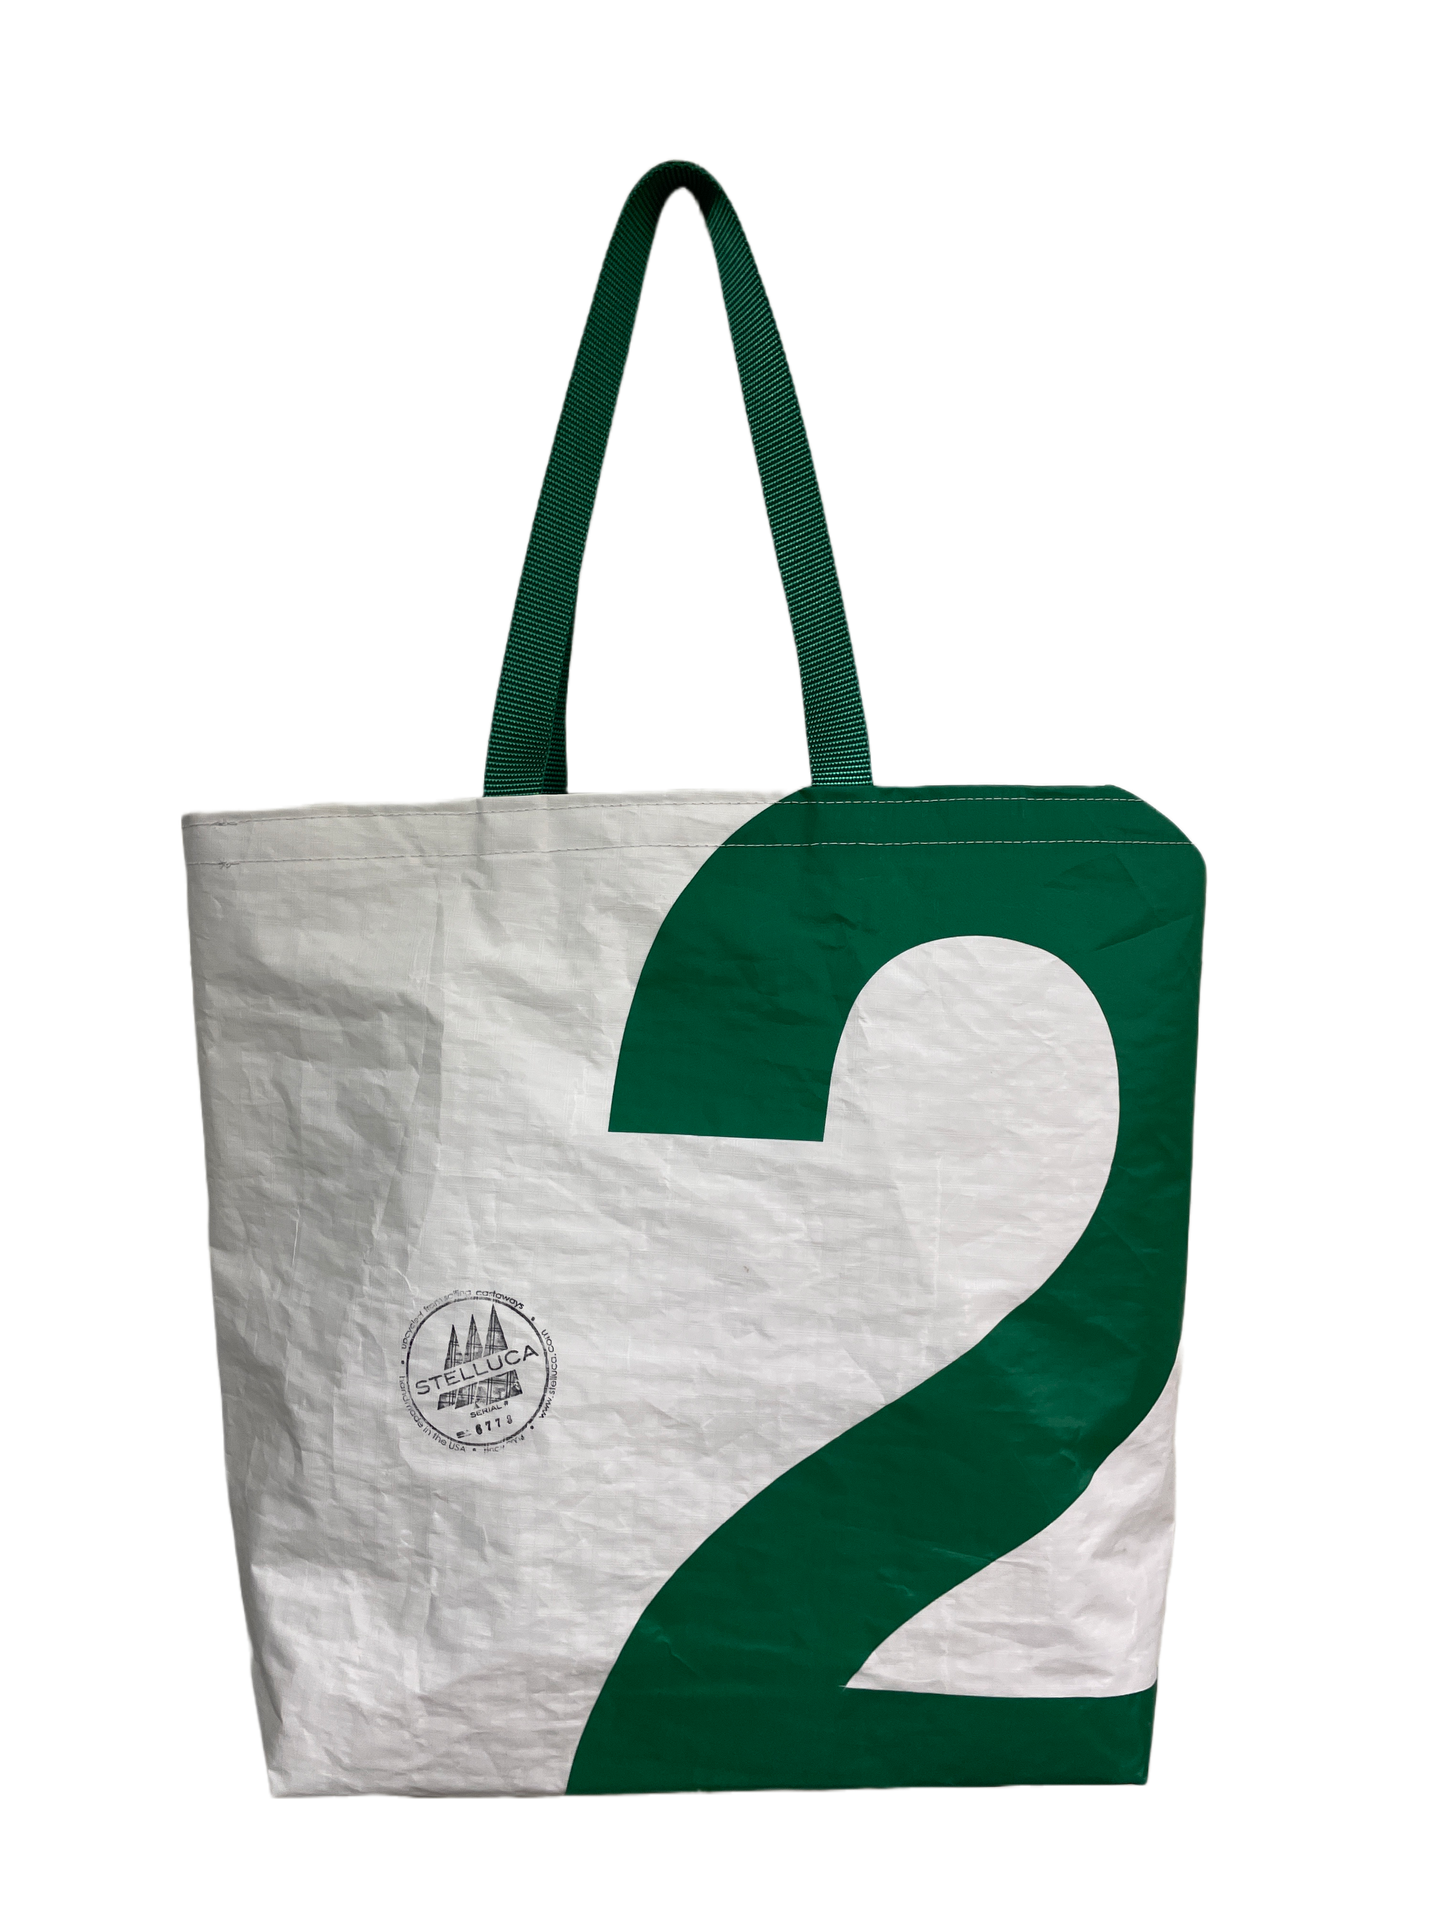 Green Grocery Tote #2